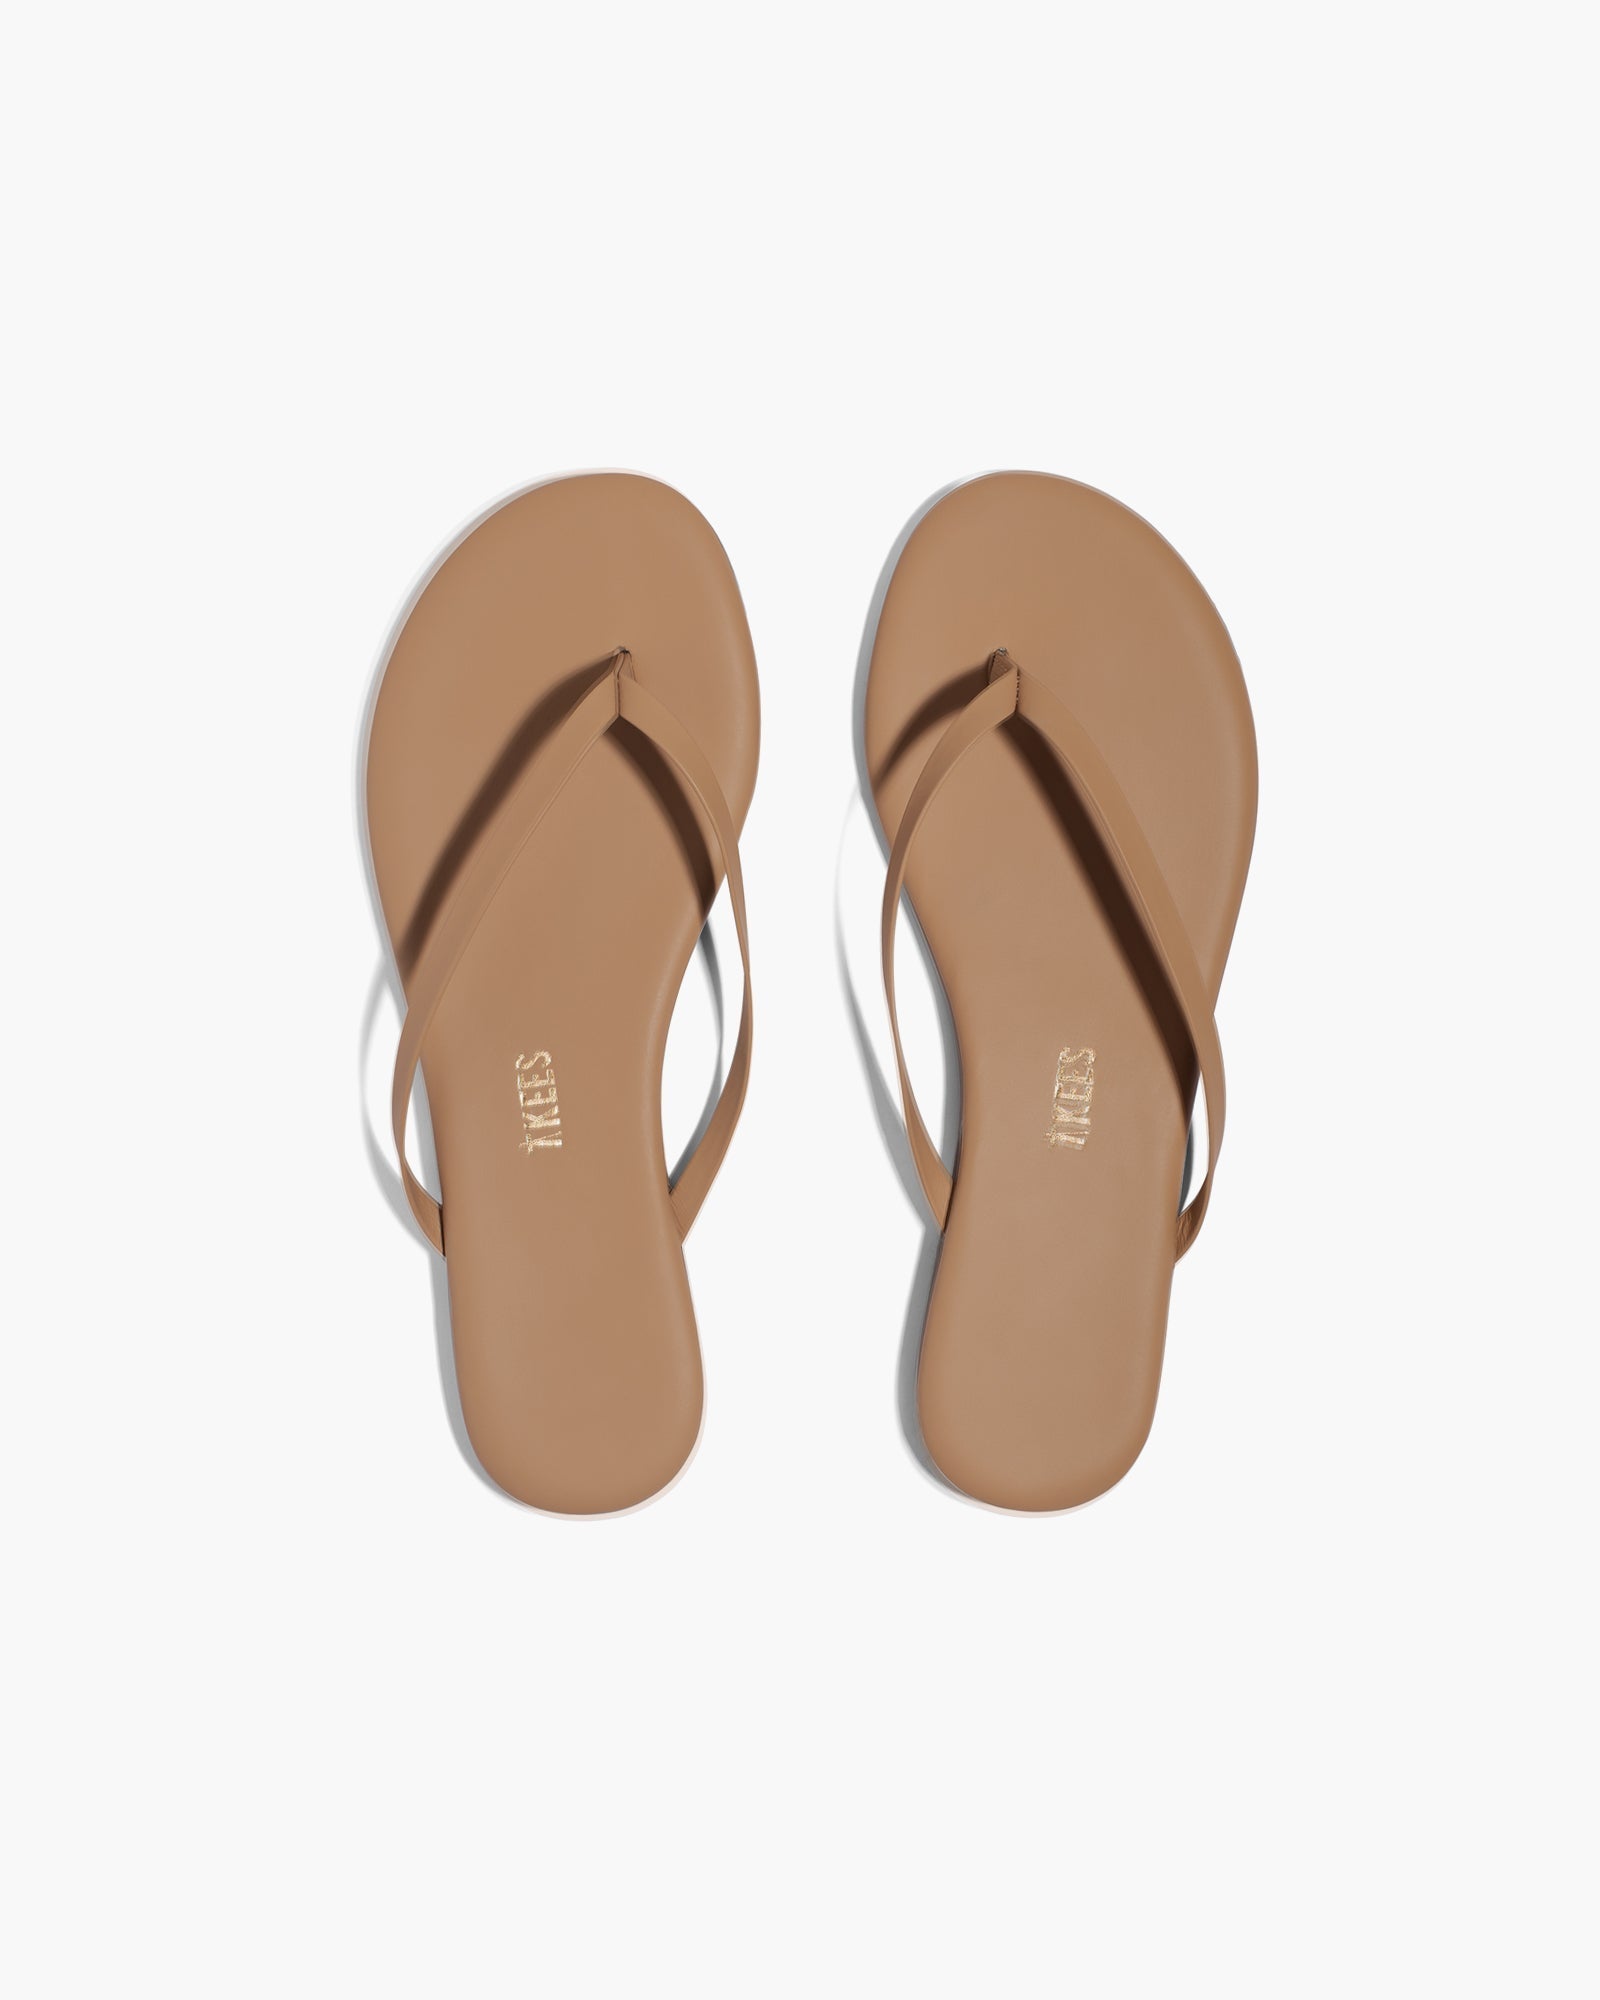 TKEES Lily Nudes Women's Flip Flops Brown | EQB263915